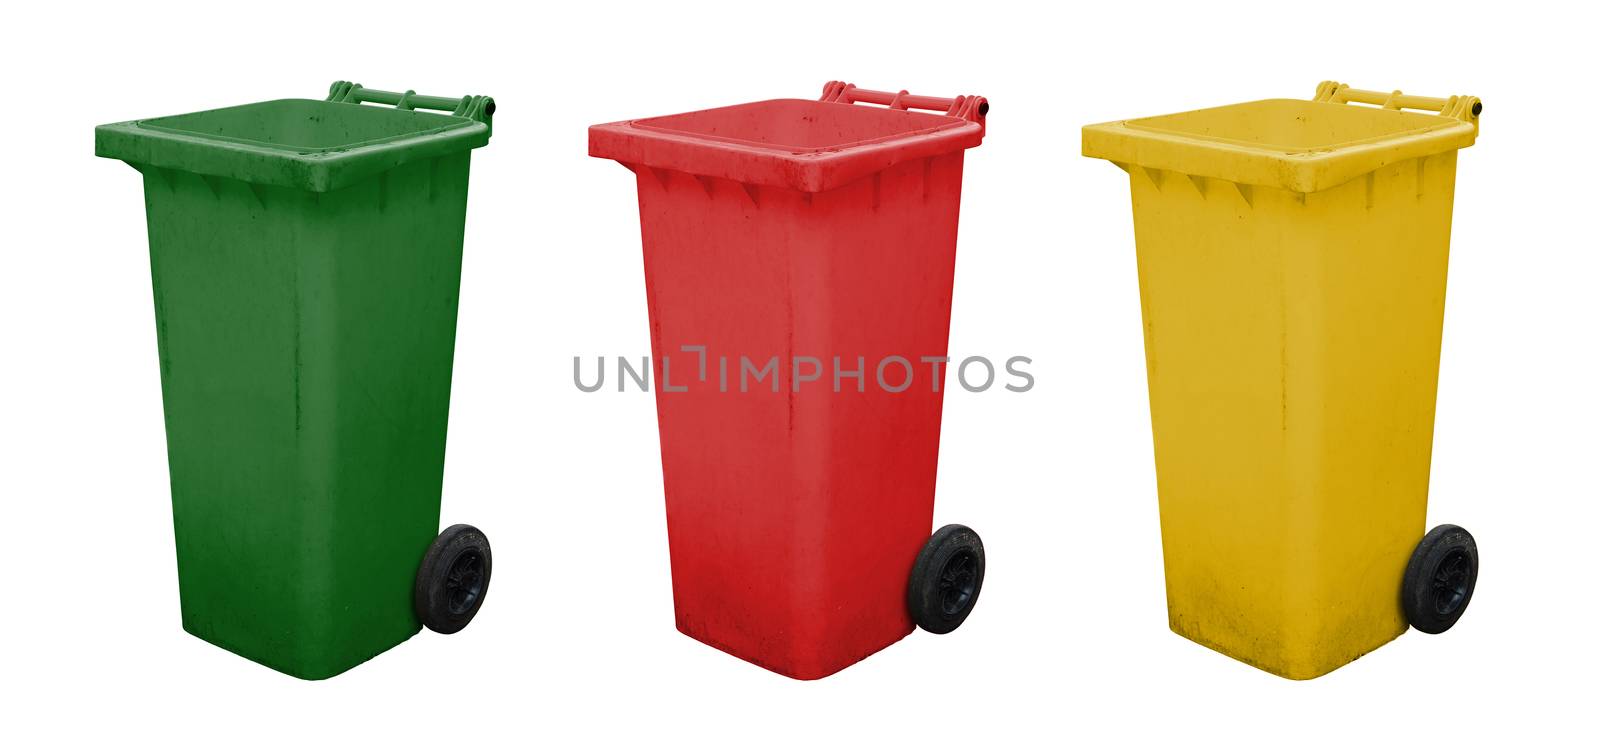 Green red and yellow garbage bins by foto76